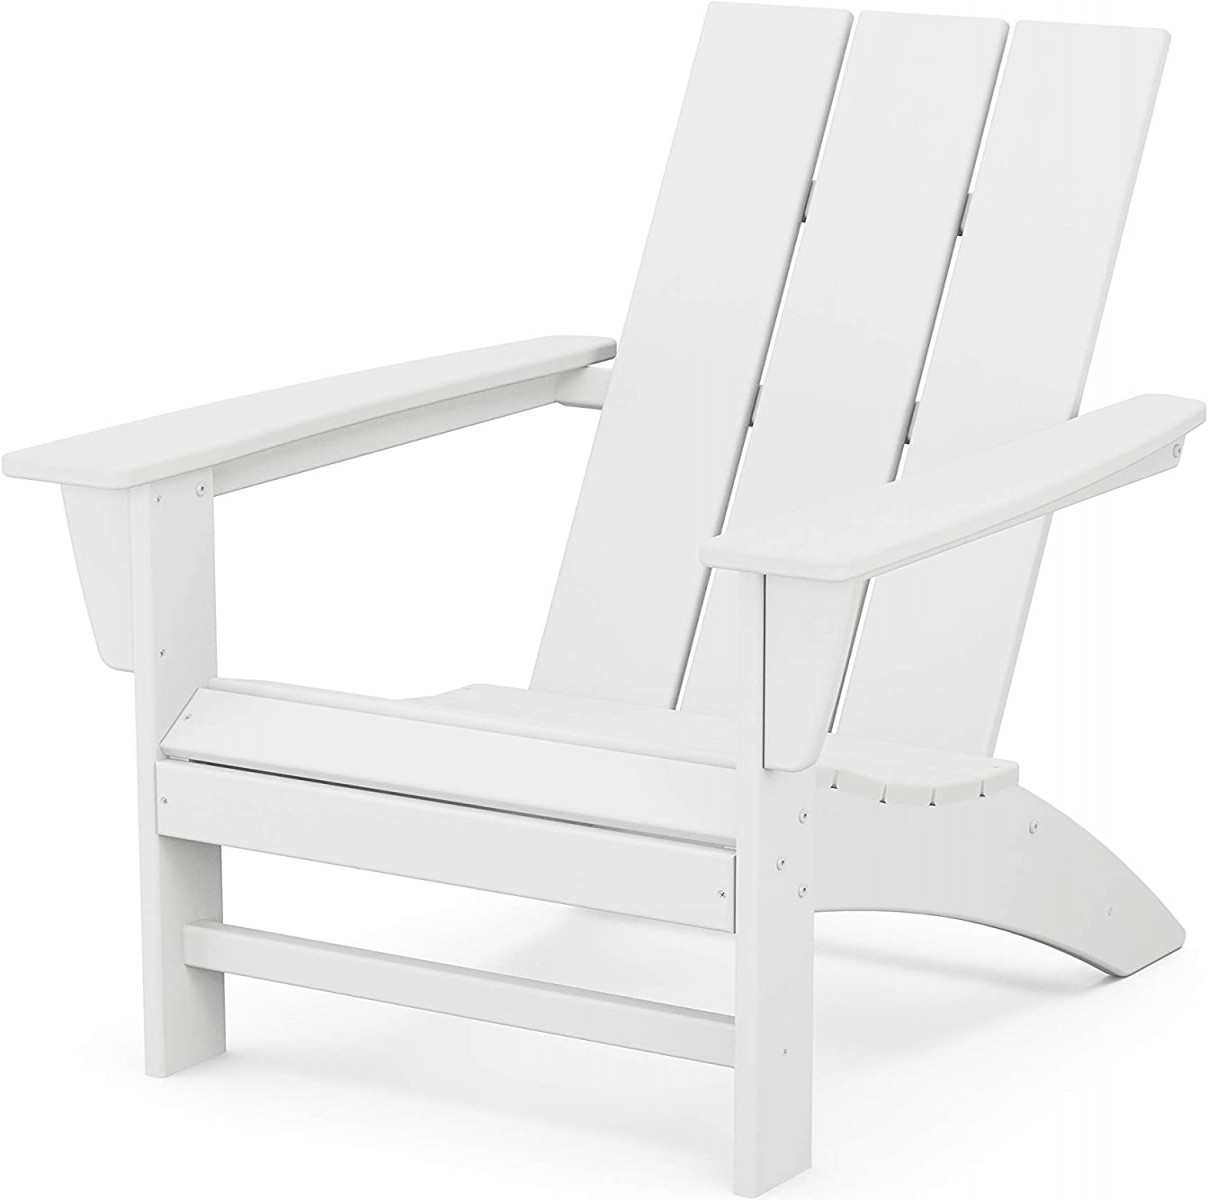 Modern Adirondack chair in poly wood, navy blue